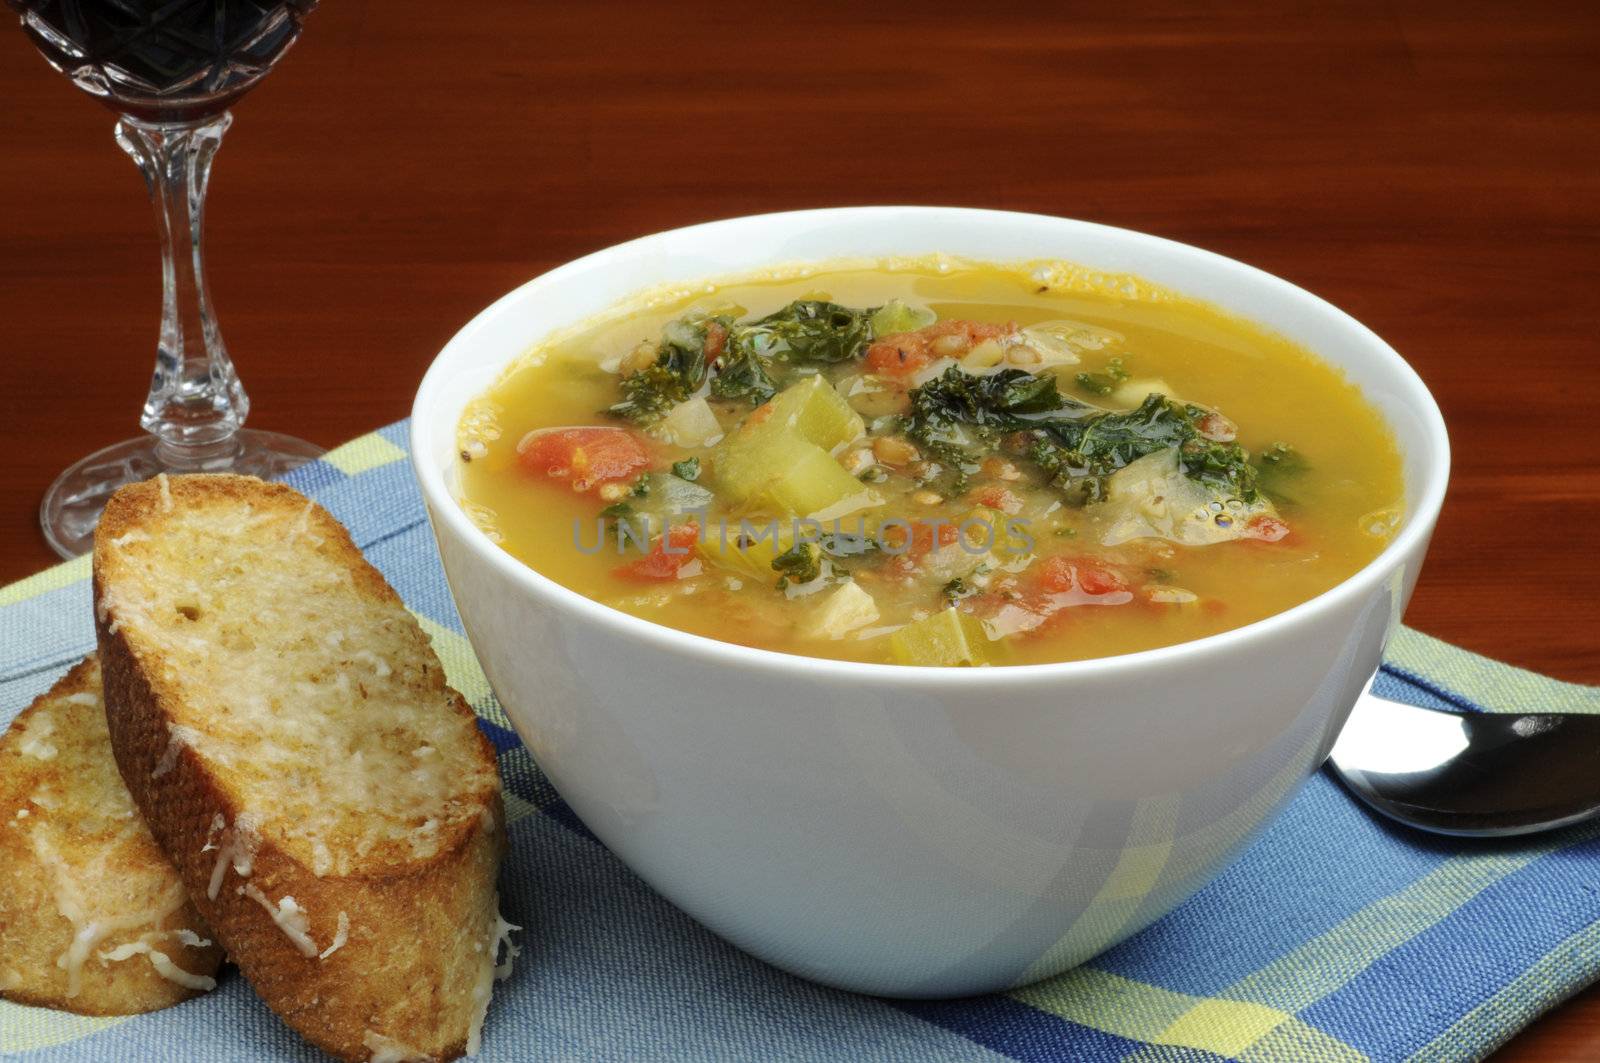 Bowl of homemade vegetable soup with crusty bread.